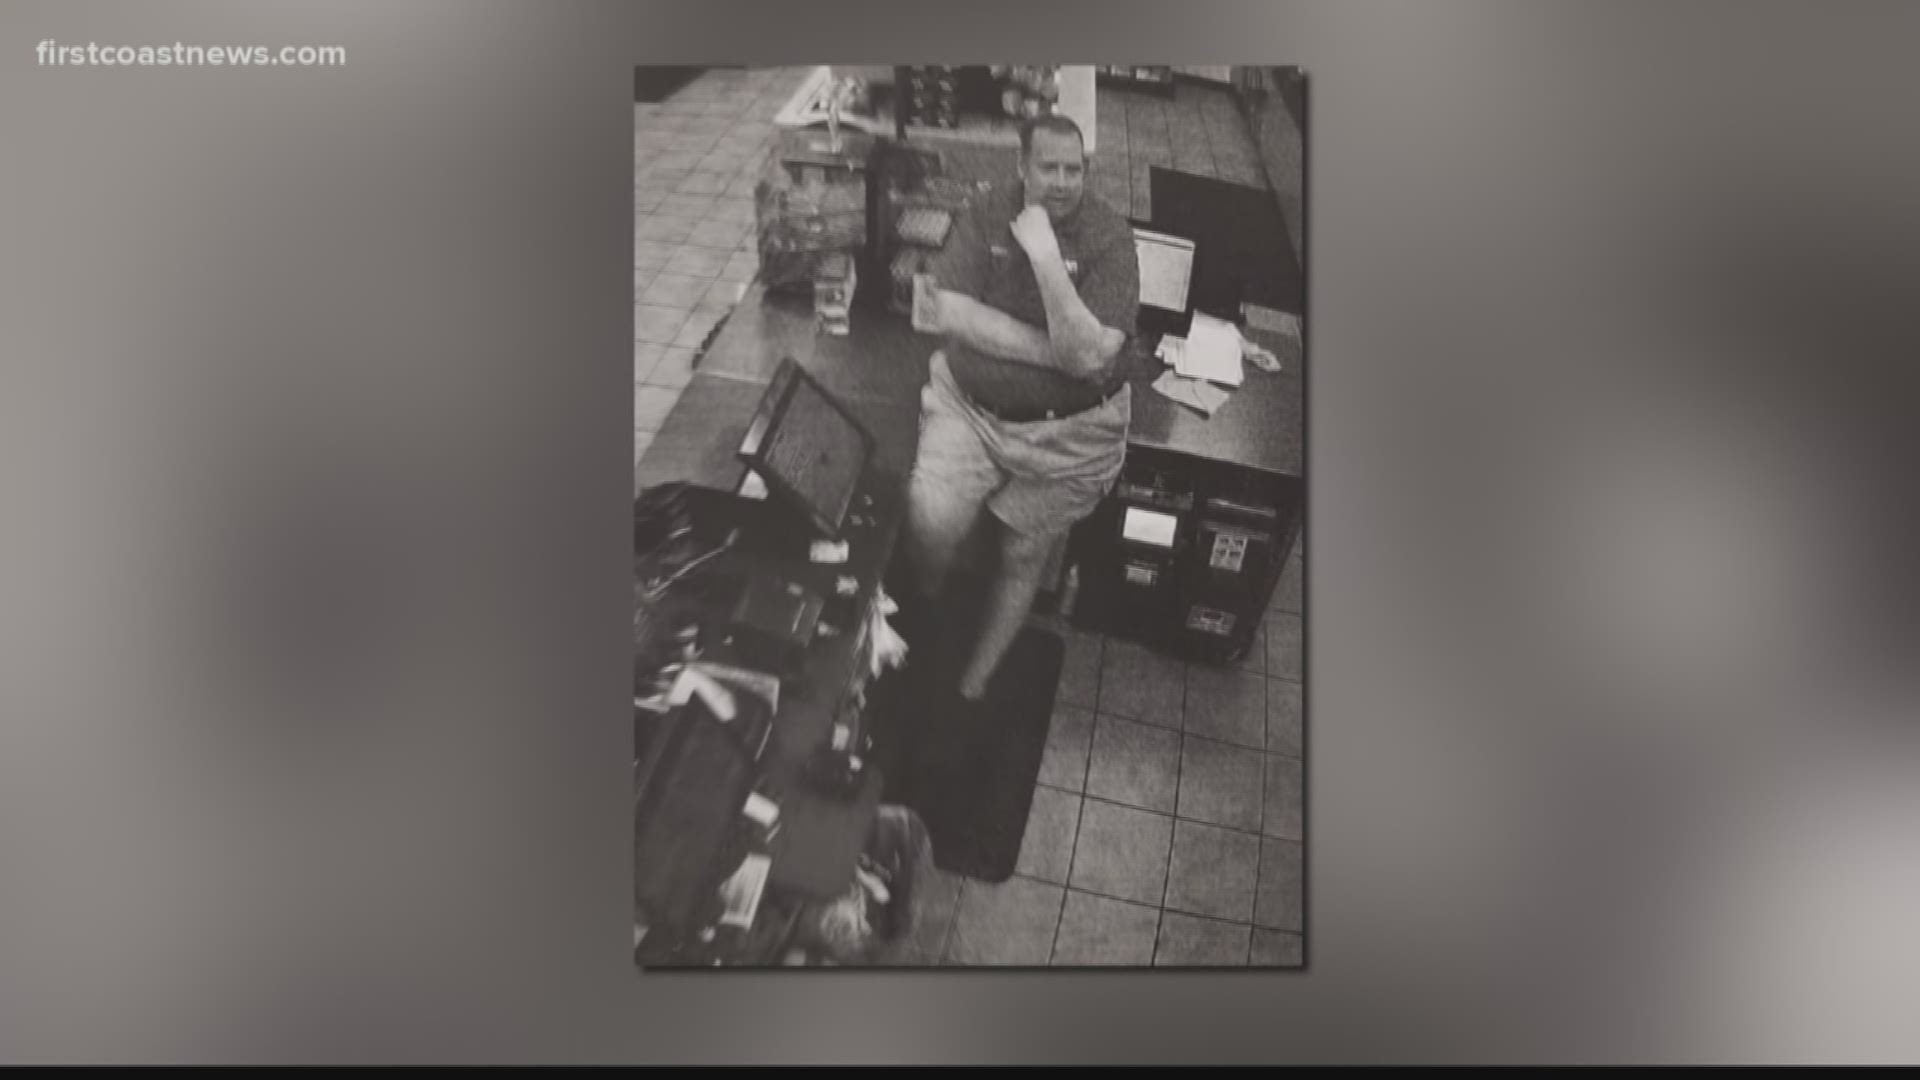 A Gate gas station employee who was shot during an armed robbery Saturday morning has died, family members confirmed to First Coast News on Monday.